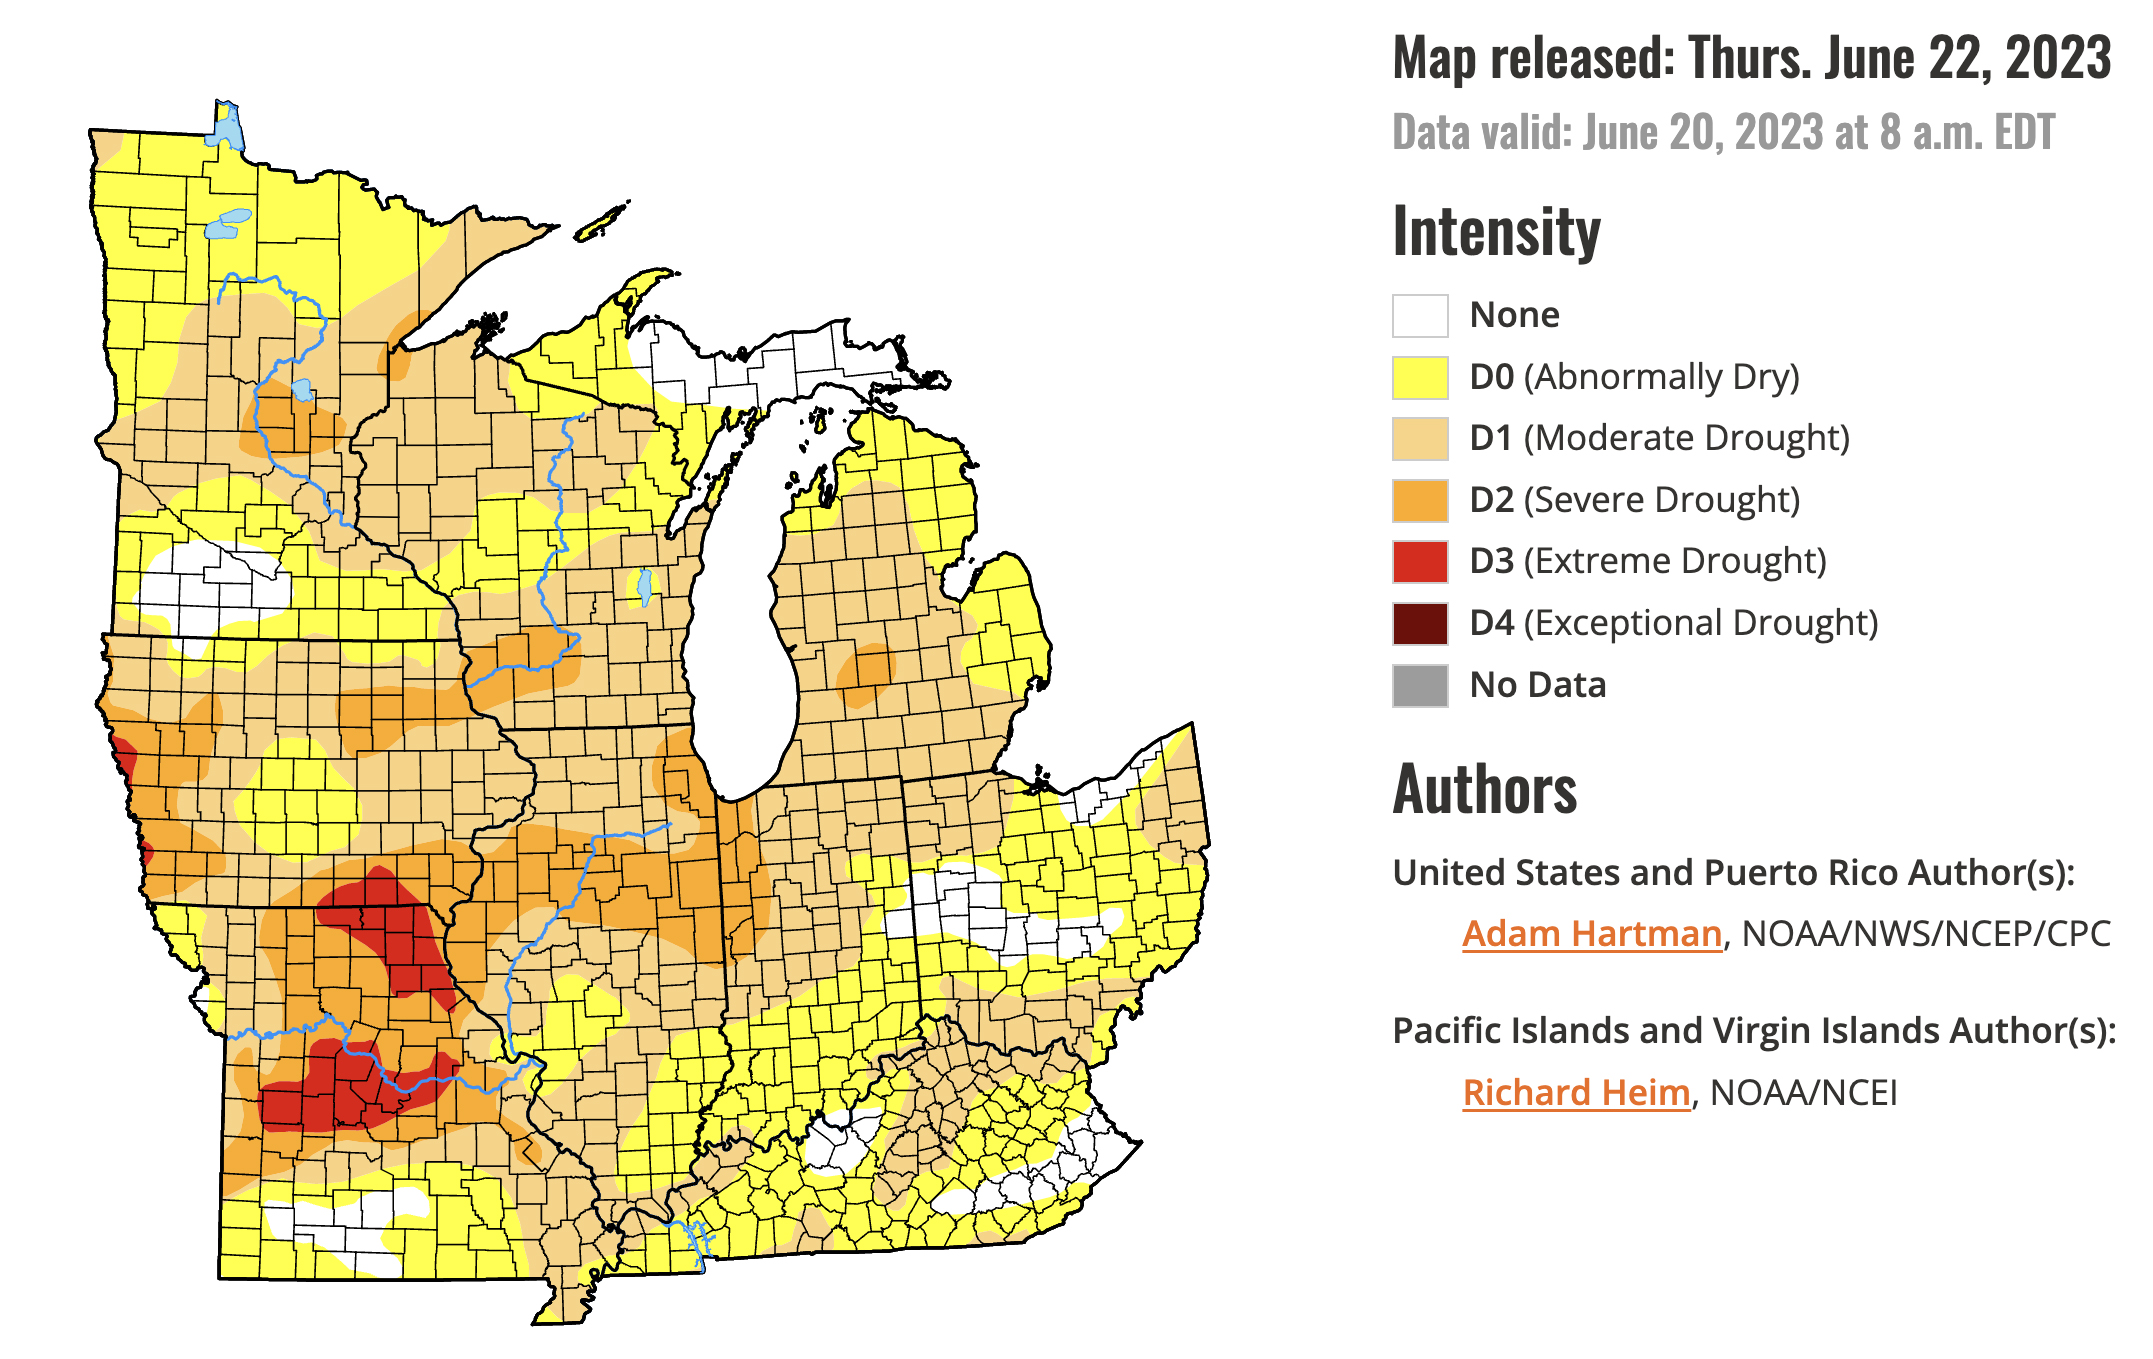 The latest drought monitor shows worsening conditions throughout the Midwest